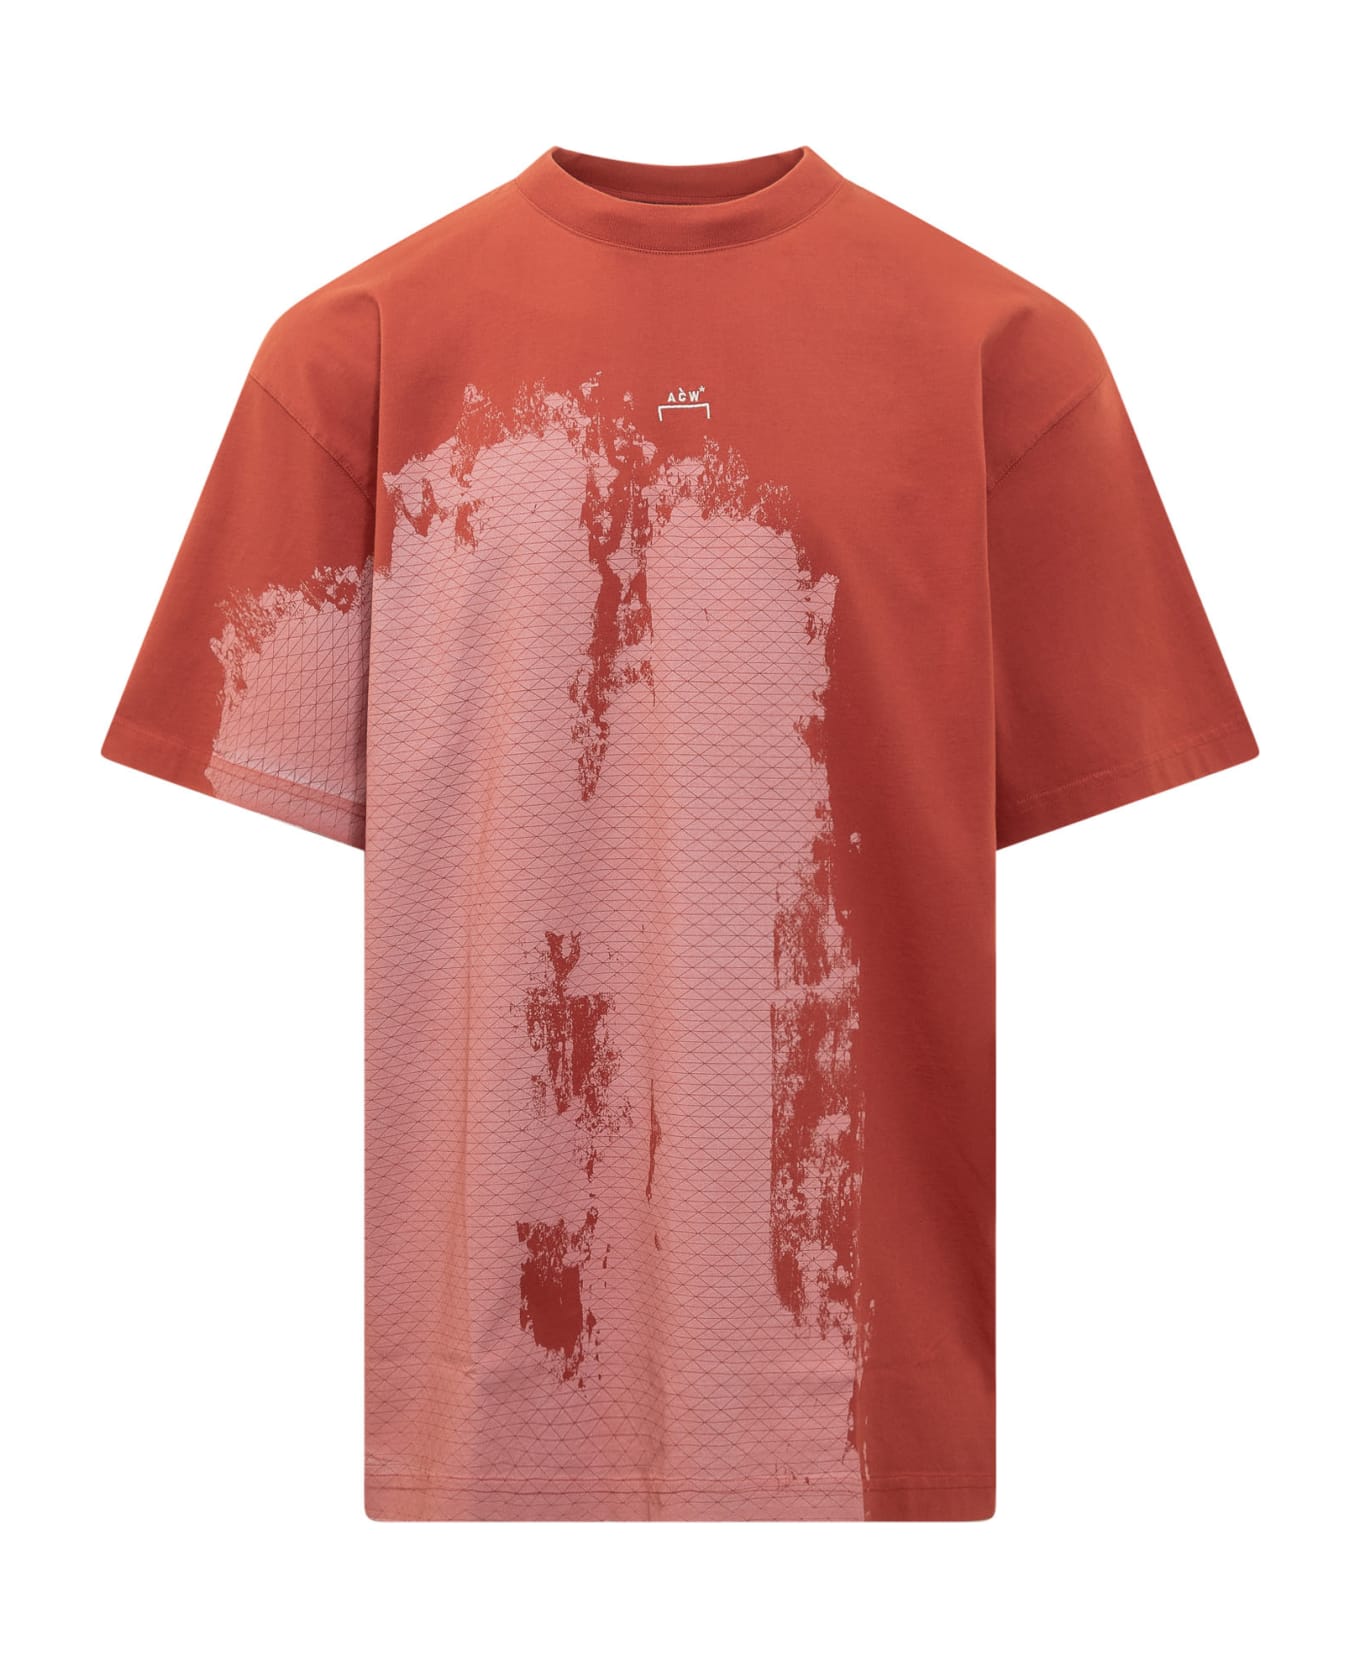 A-COLD-WALL Brushstroke T-shirt - RUST シャツ